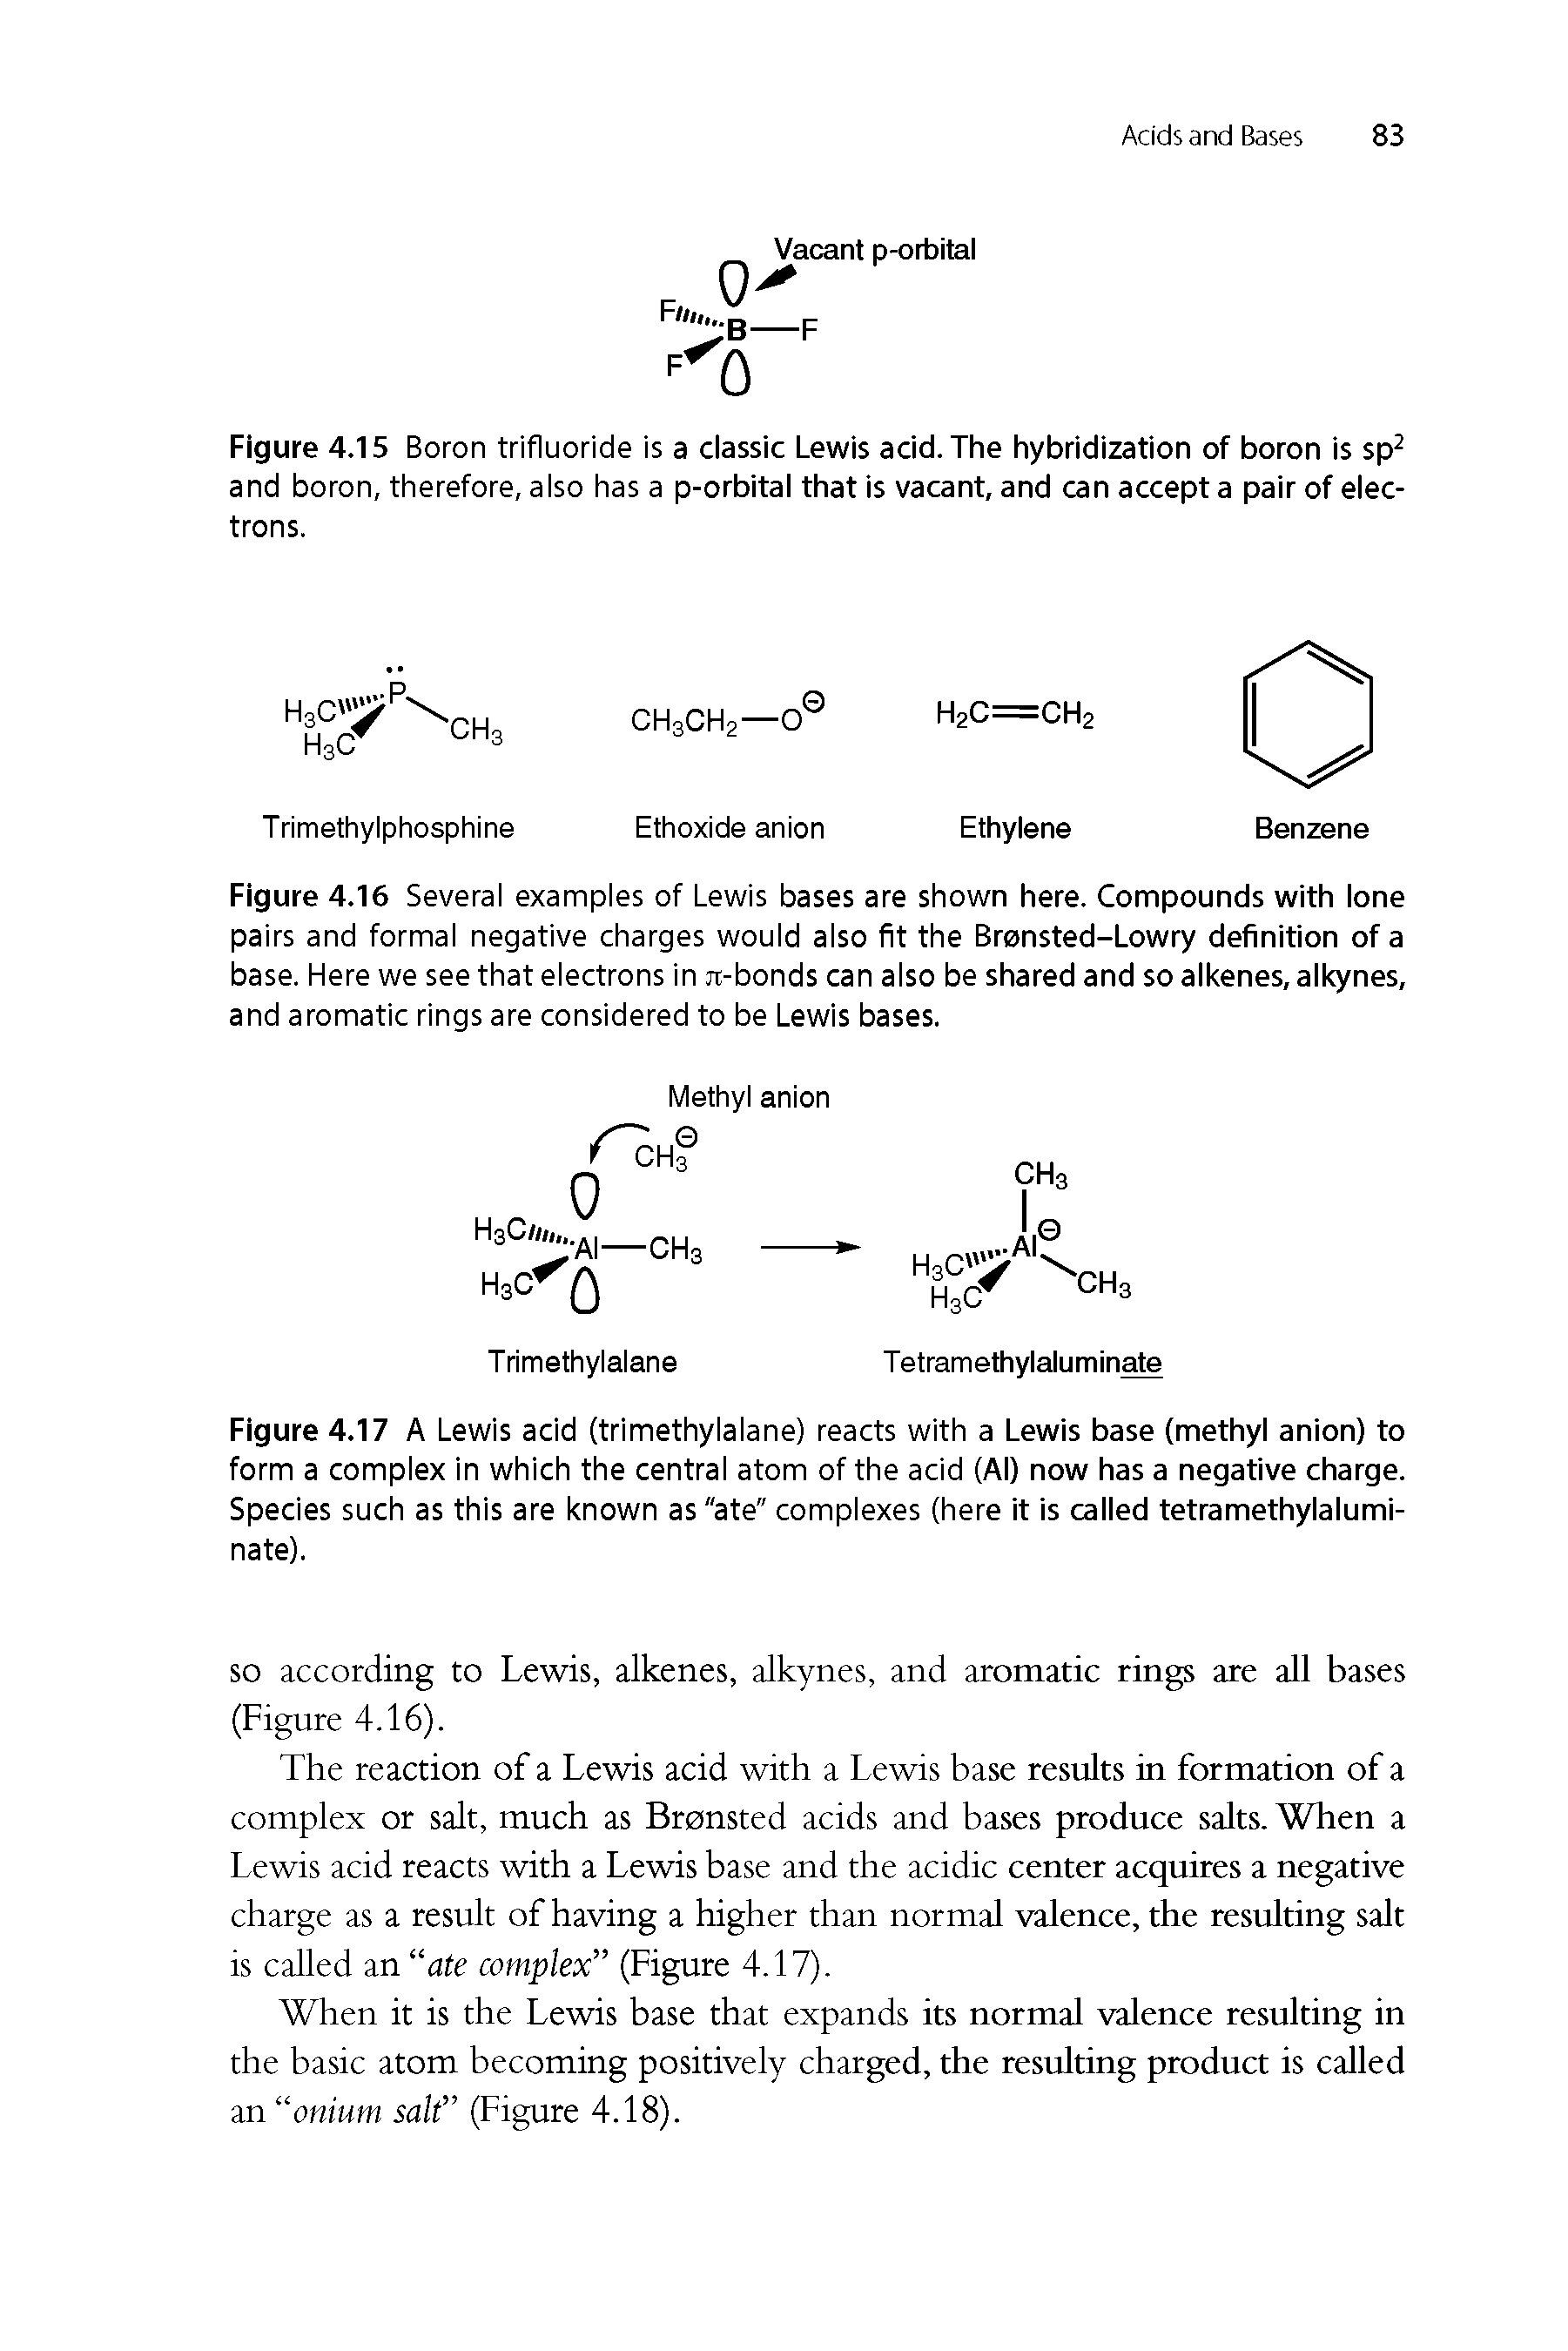 Figure 4.15 Boron trifluoride is a classic Lewis acid. The hybridization of boron is sp and boron, therefore, also has a p-orbital that is vacant, and can accept a pair of electrons.